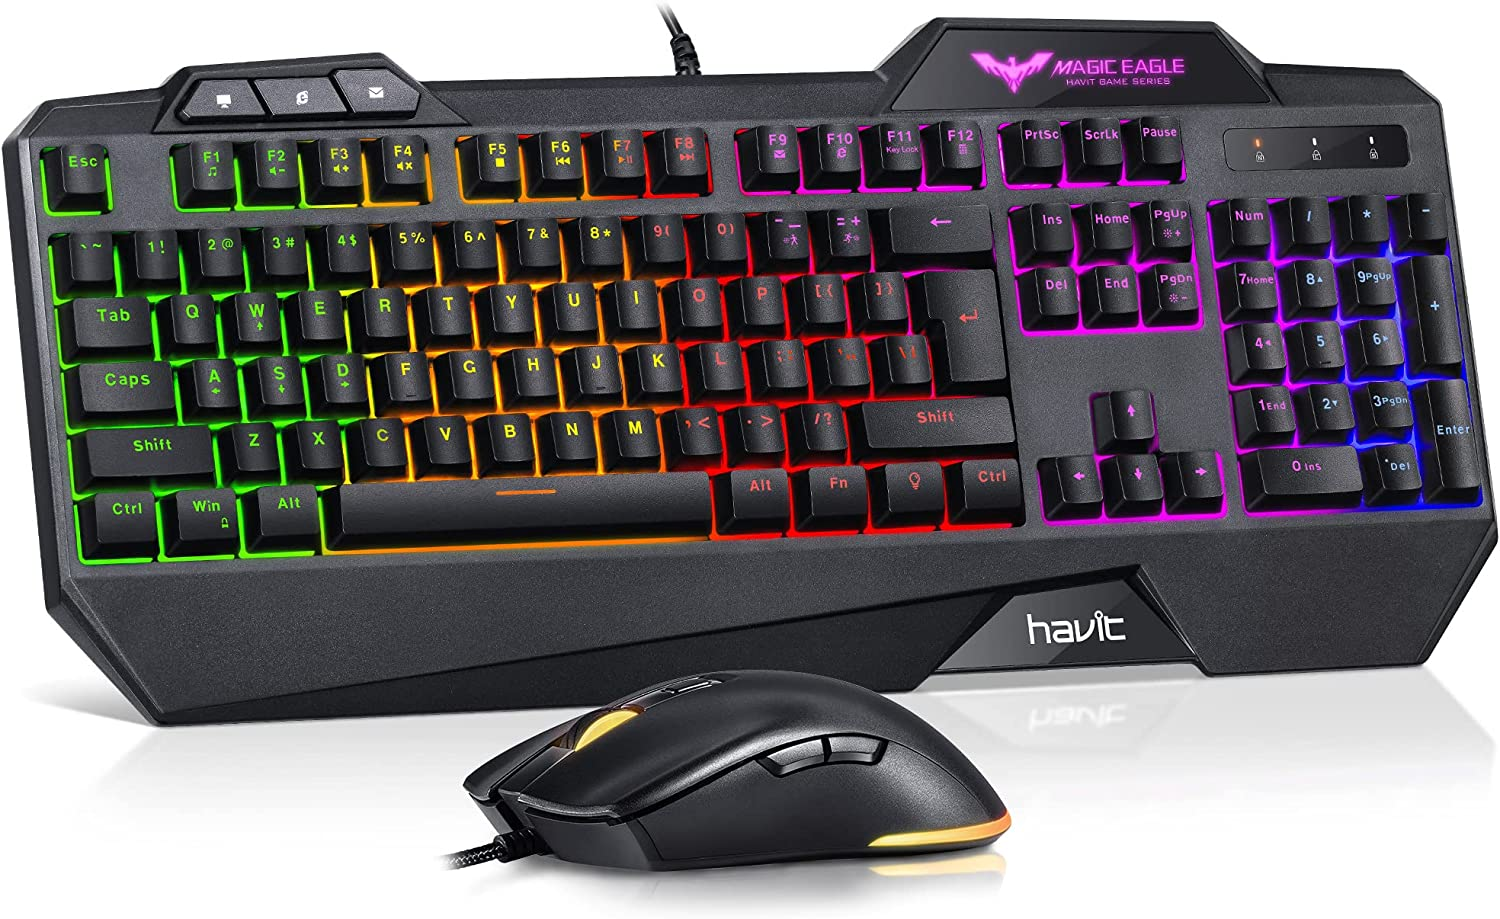 Using gaming keyboards with RGB backlight illumination act like a third eye in finding enemies.